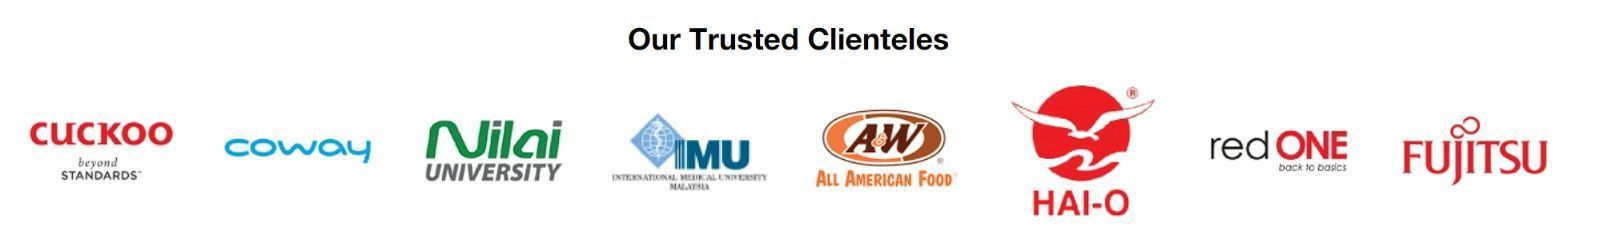 Our Trusted Clienteles